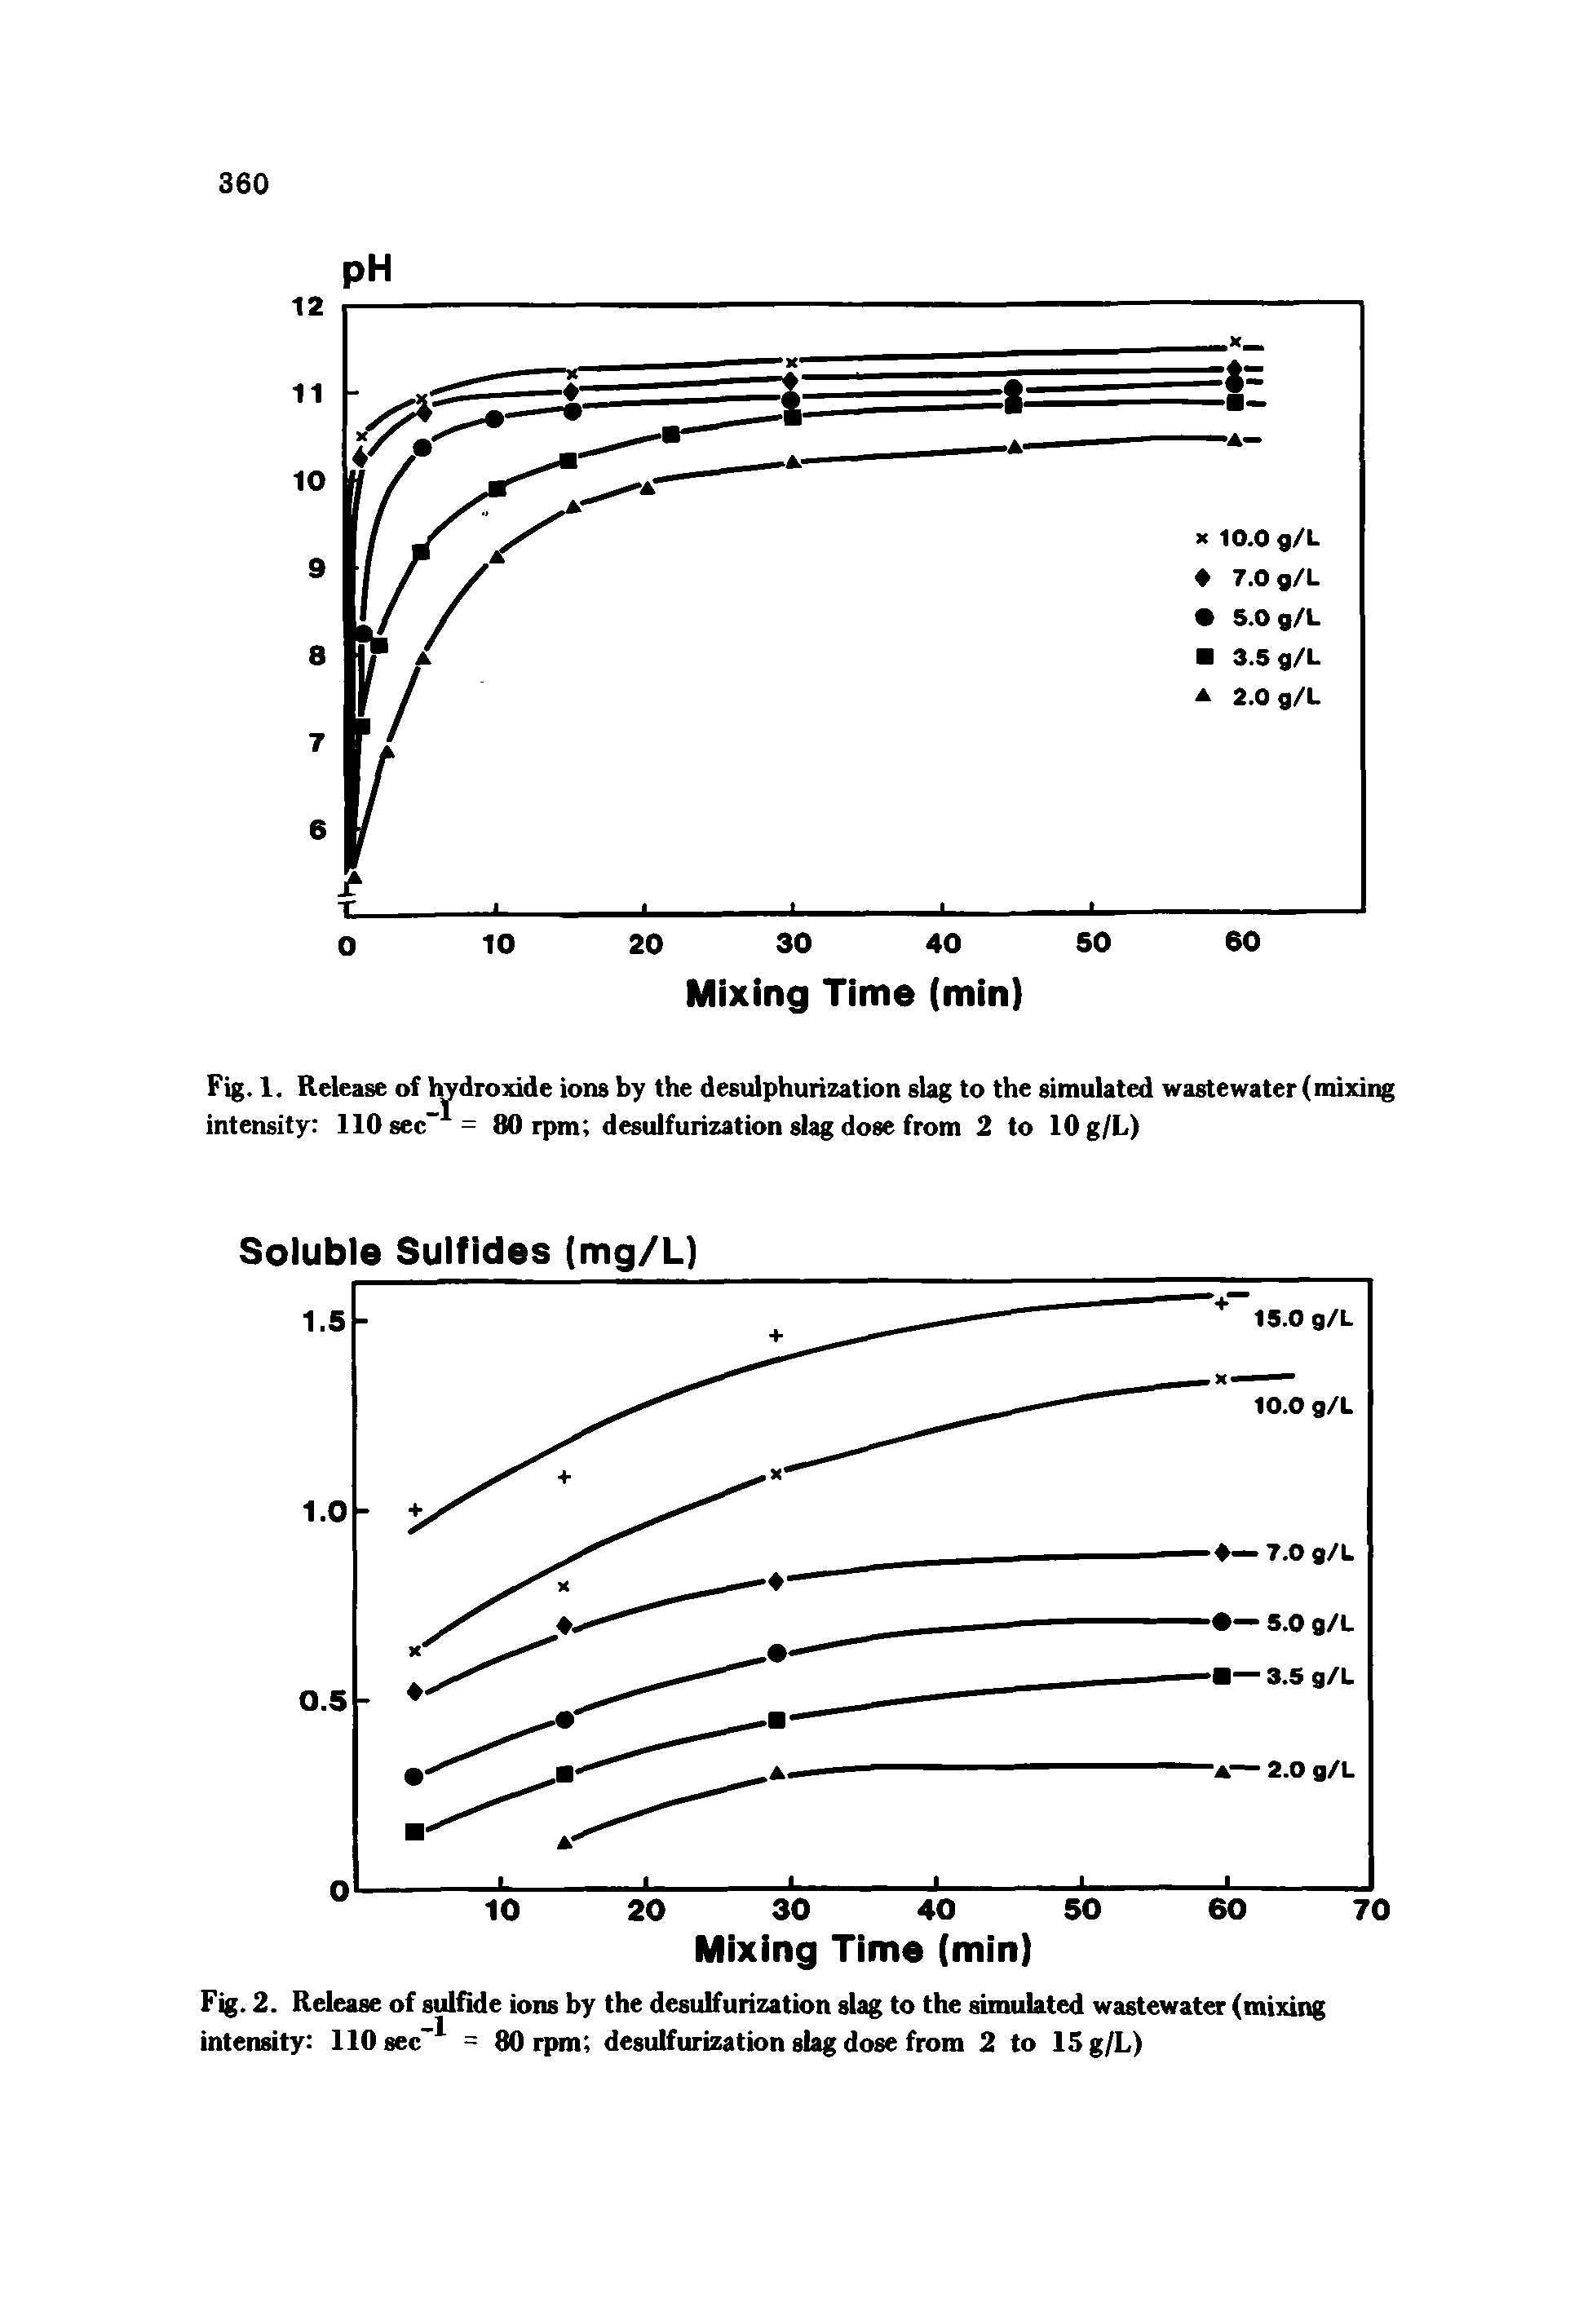 Fig. 1. Release of hydroxide ions by the desulphurization slag to the simulated wastewater (mixing intensity 110sec = 80 rpm desulfurization slag dose from 2 to lOg/L)...